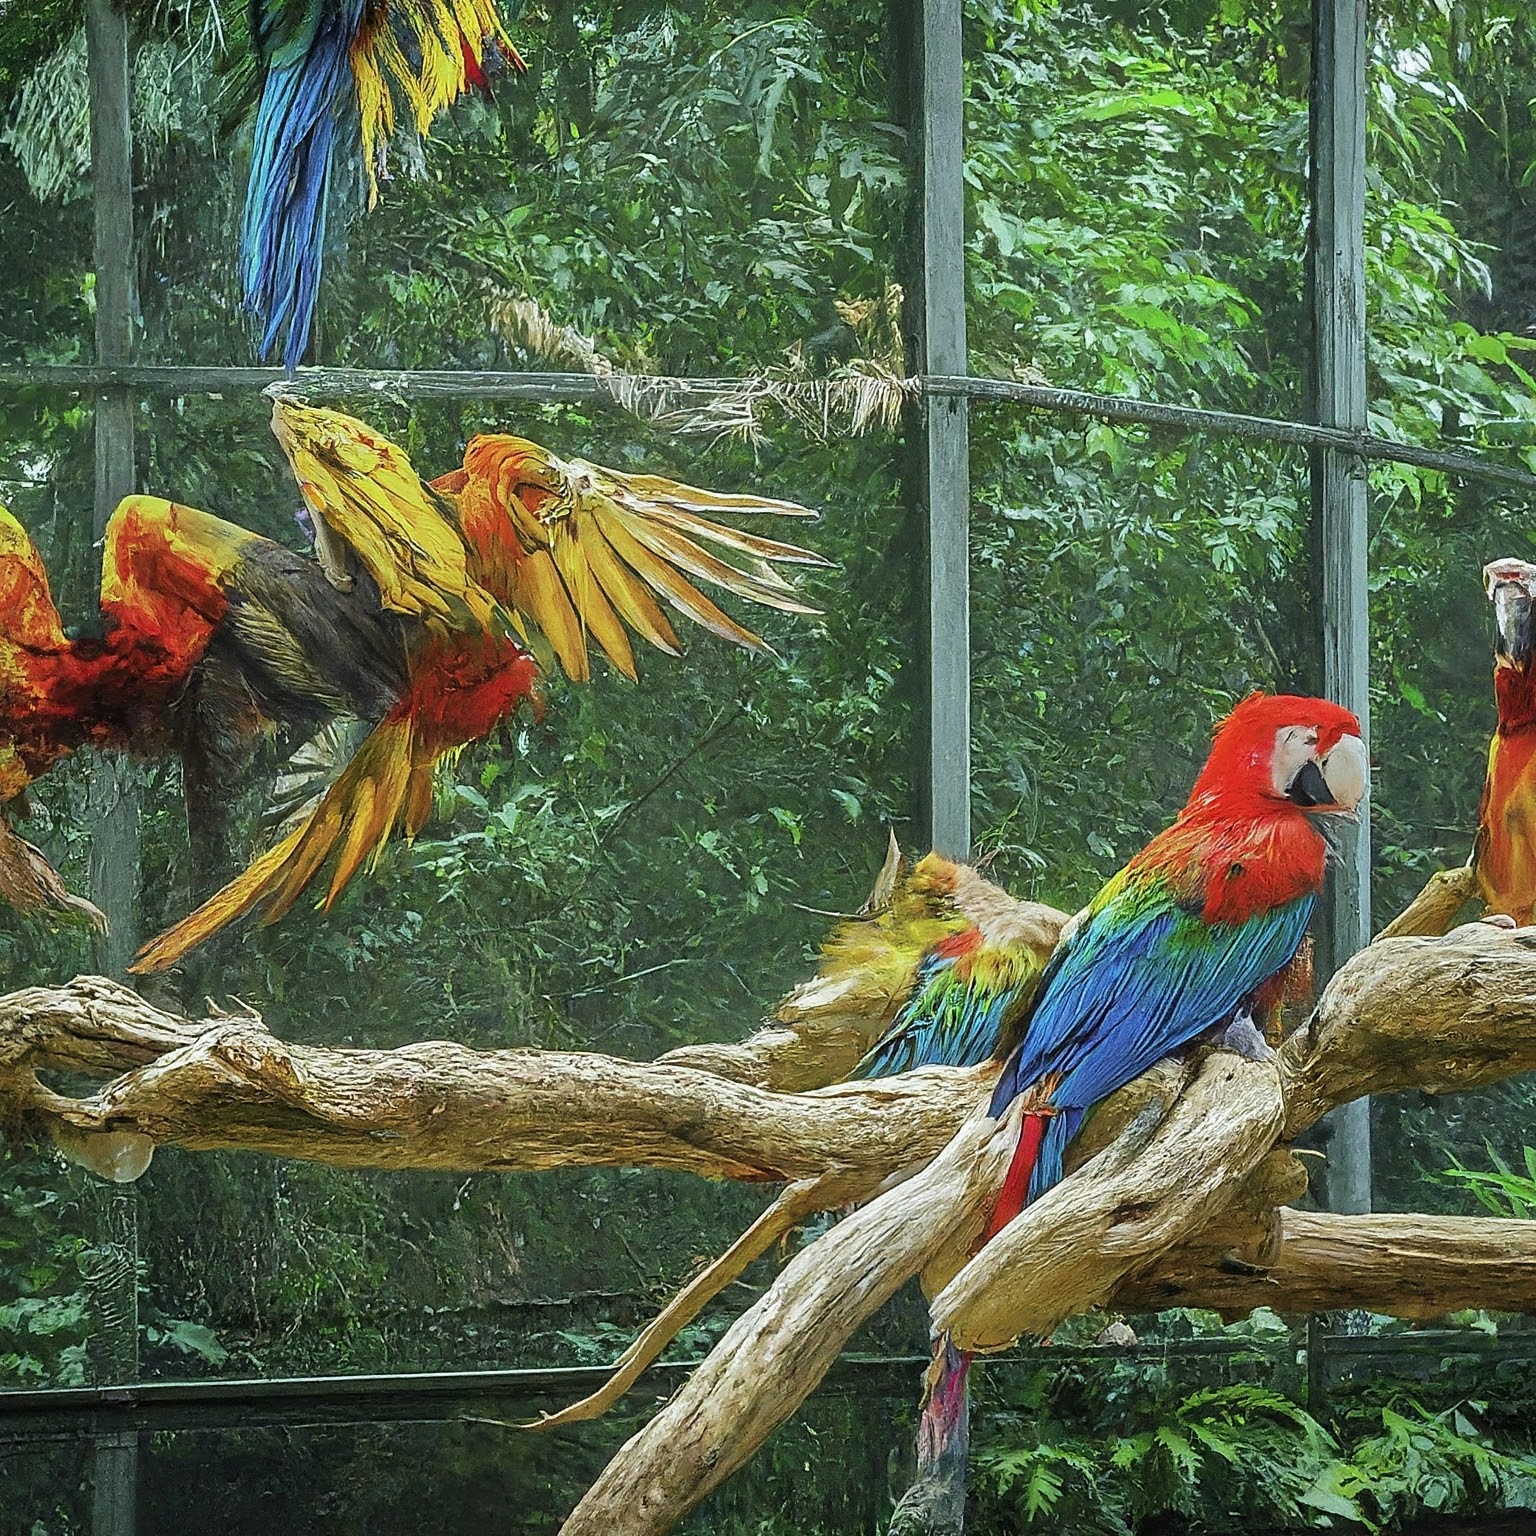 Vibrant birds flying freely in a netted enclosure at Jurong Bird Park.